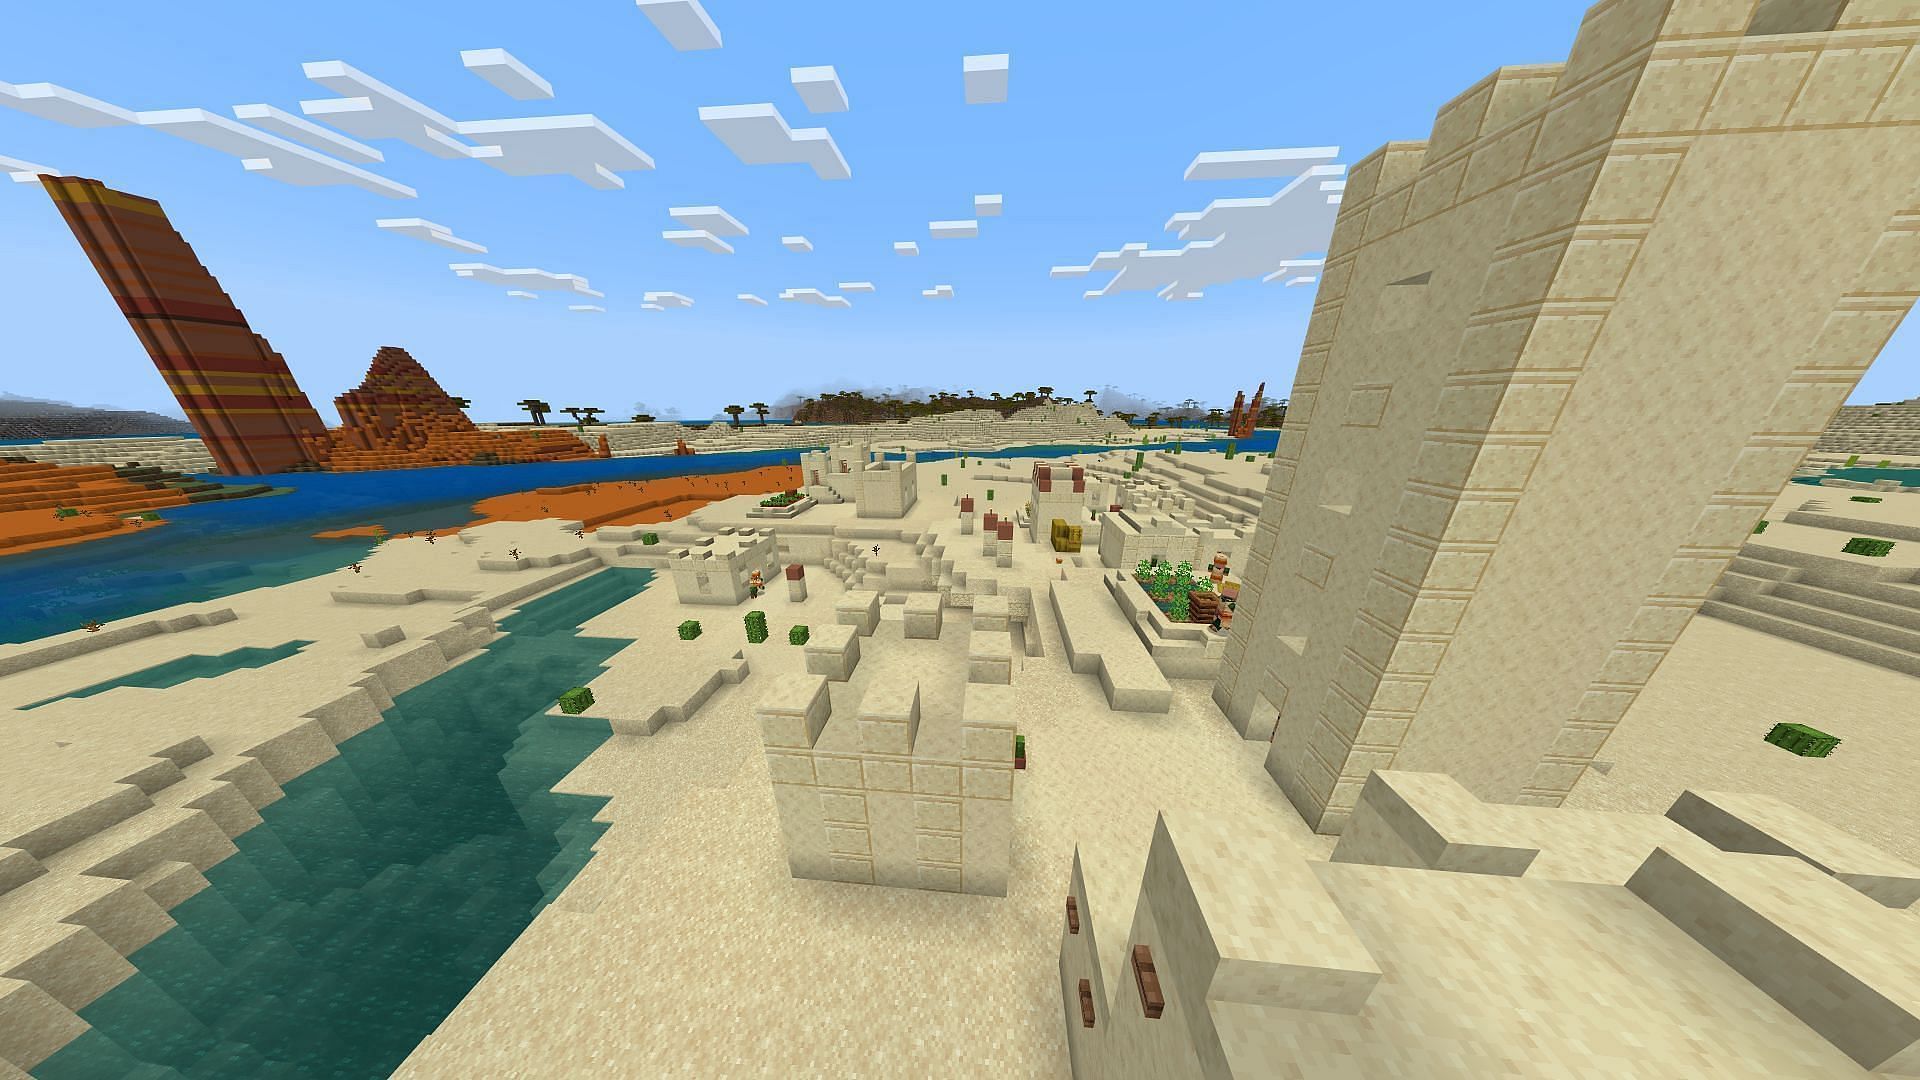 A village with a desert well is only the beginning in this Minecraft seed (Image via Mojang Studios)